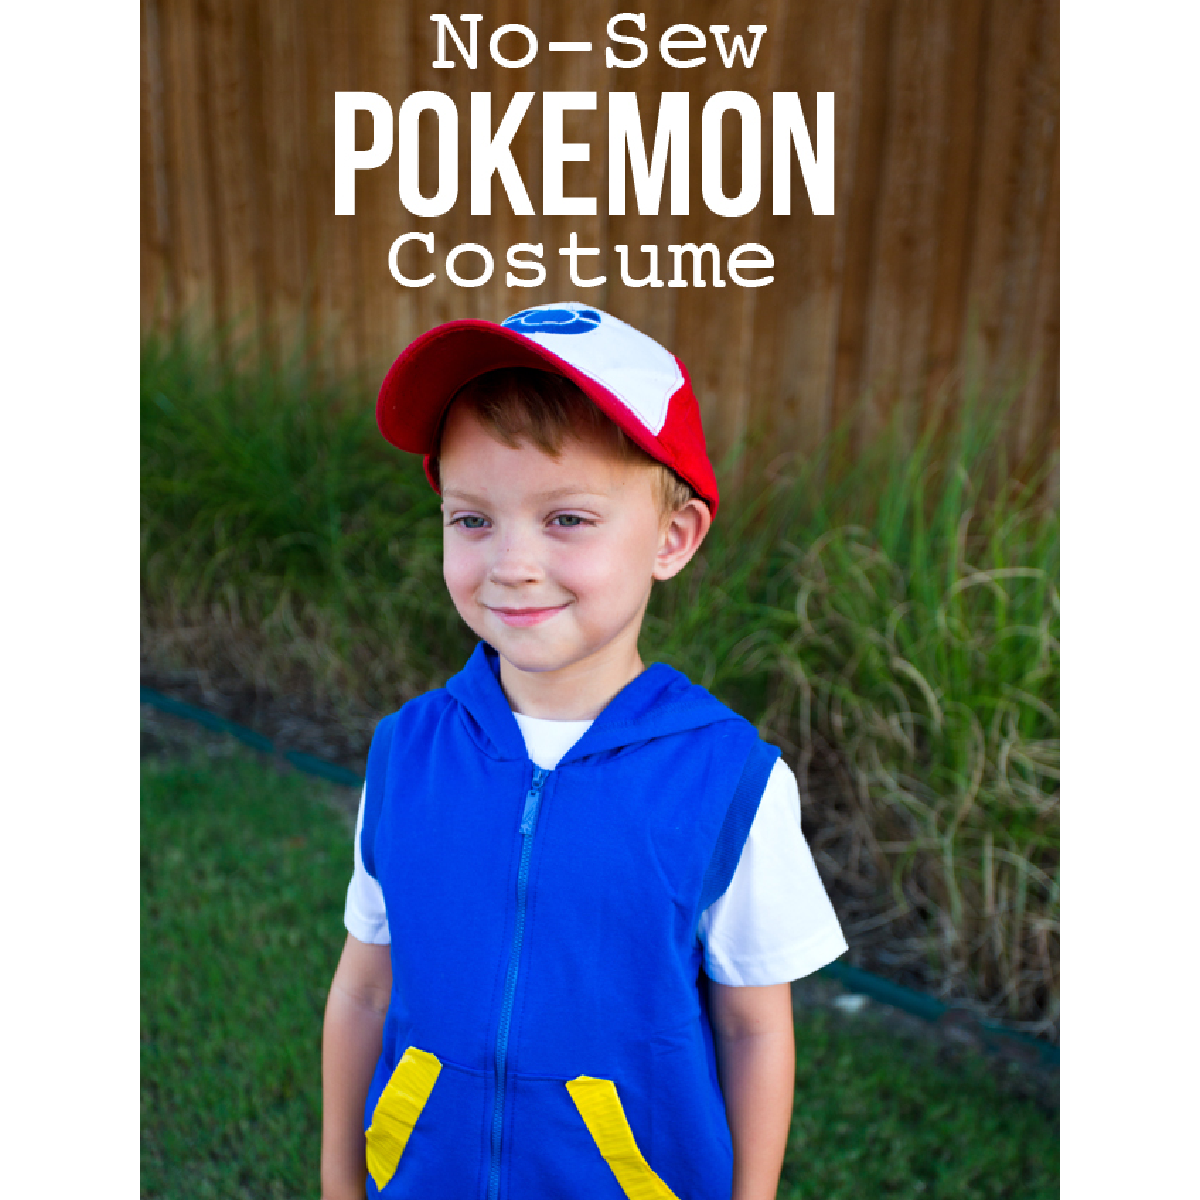 Dress up ideas- Ash Ketchum costume worn by a little boy with hat and vest- kids activities blog